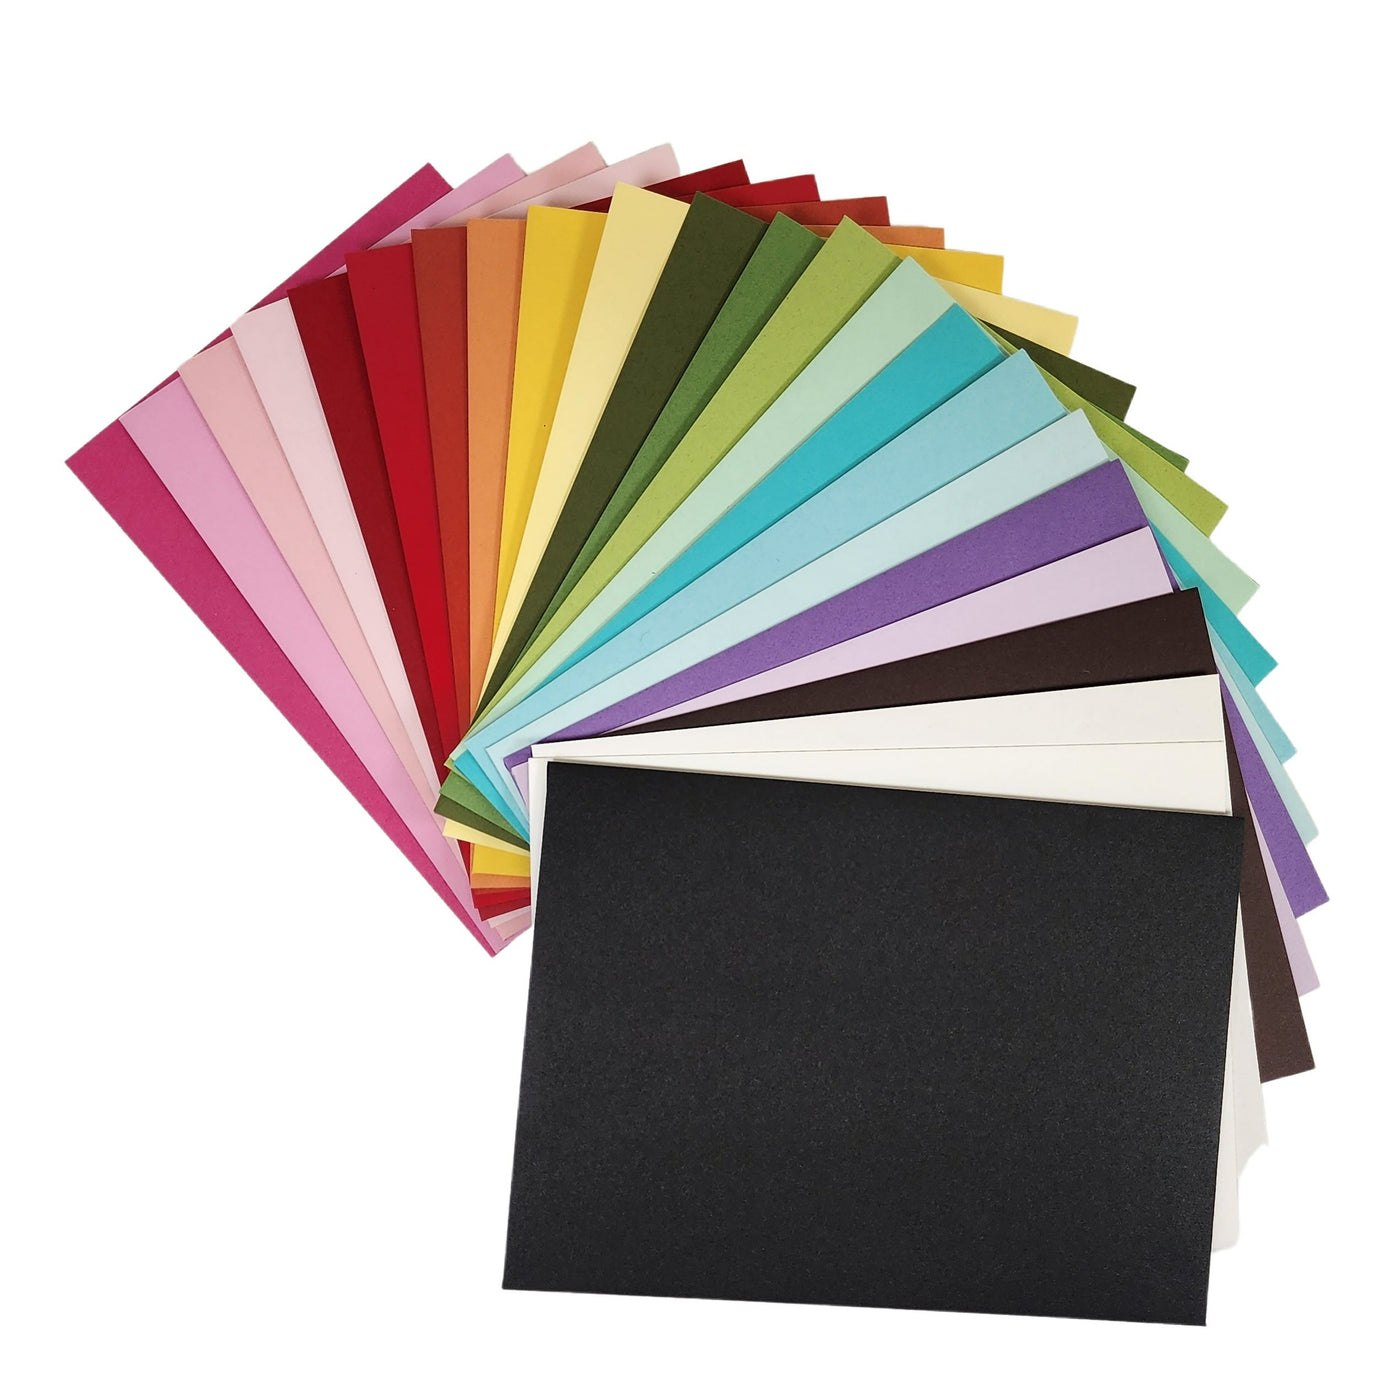 Pack includes all 24 colors of Pop-Tone A7 envelopes and is a convenient solution for sending out DIY cards and invitations. 